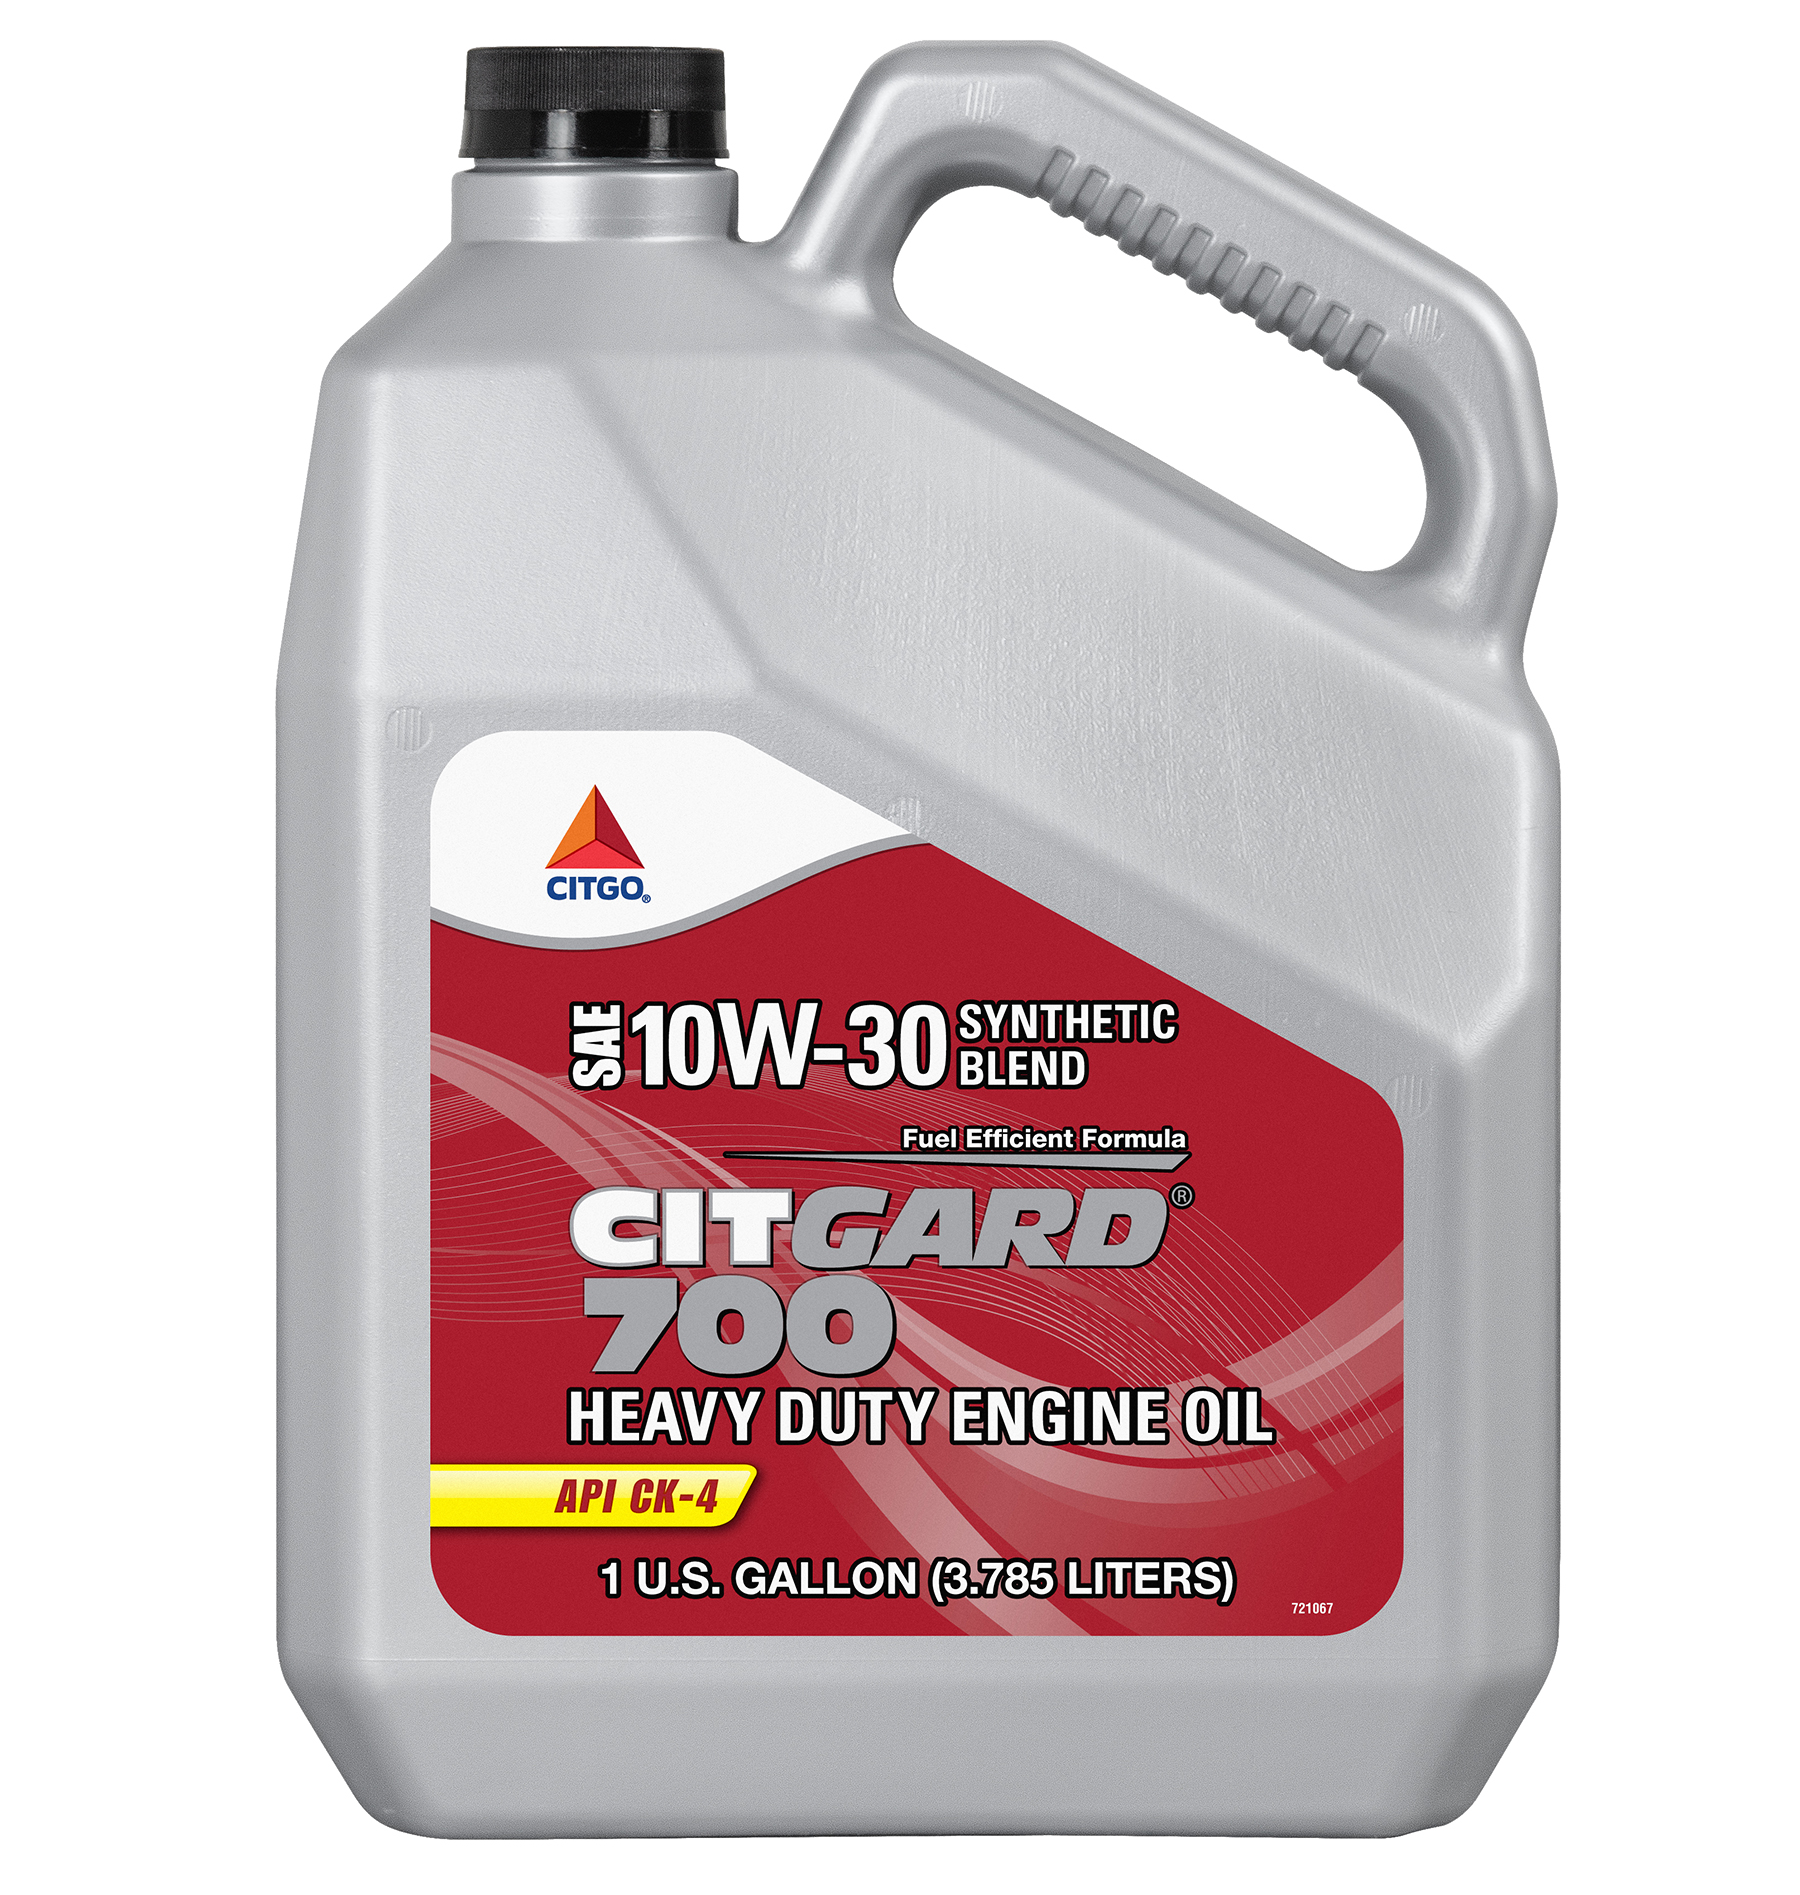 Image for product CITGARD_700_SYNBLEND_EO